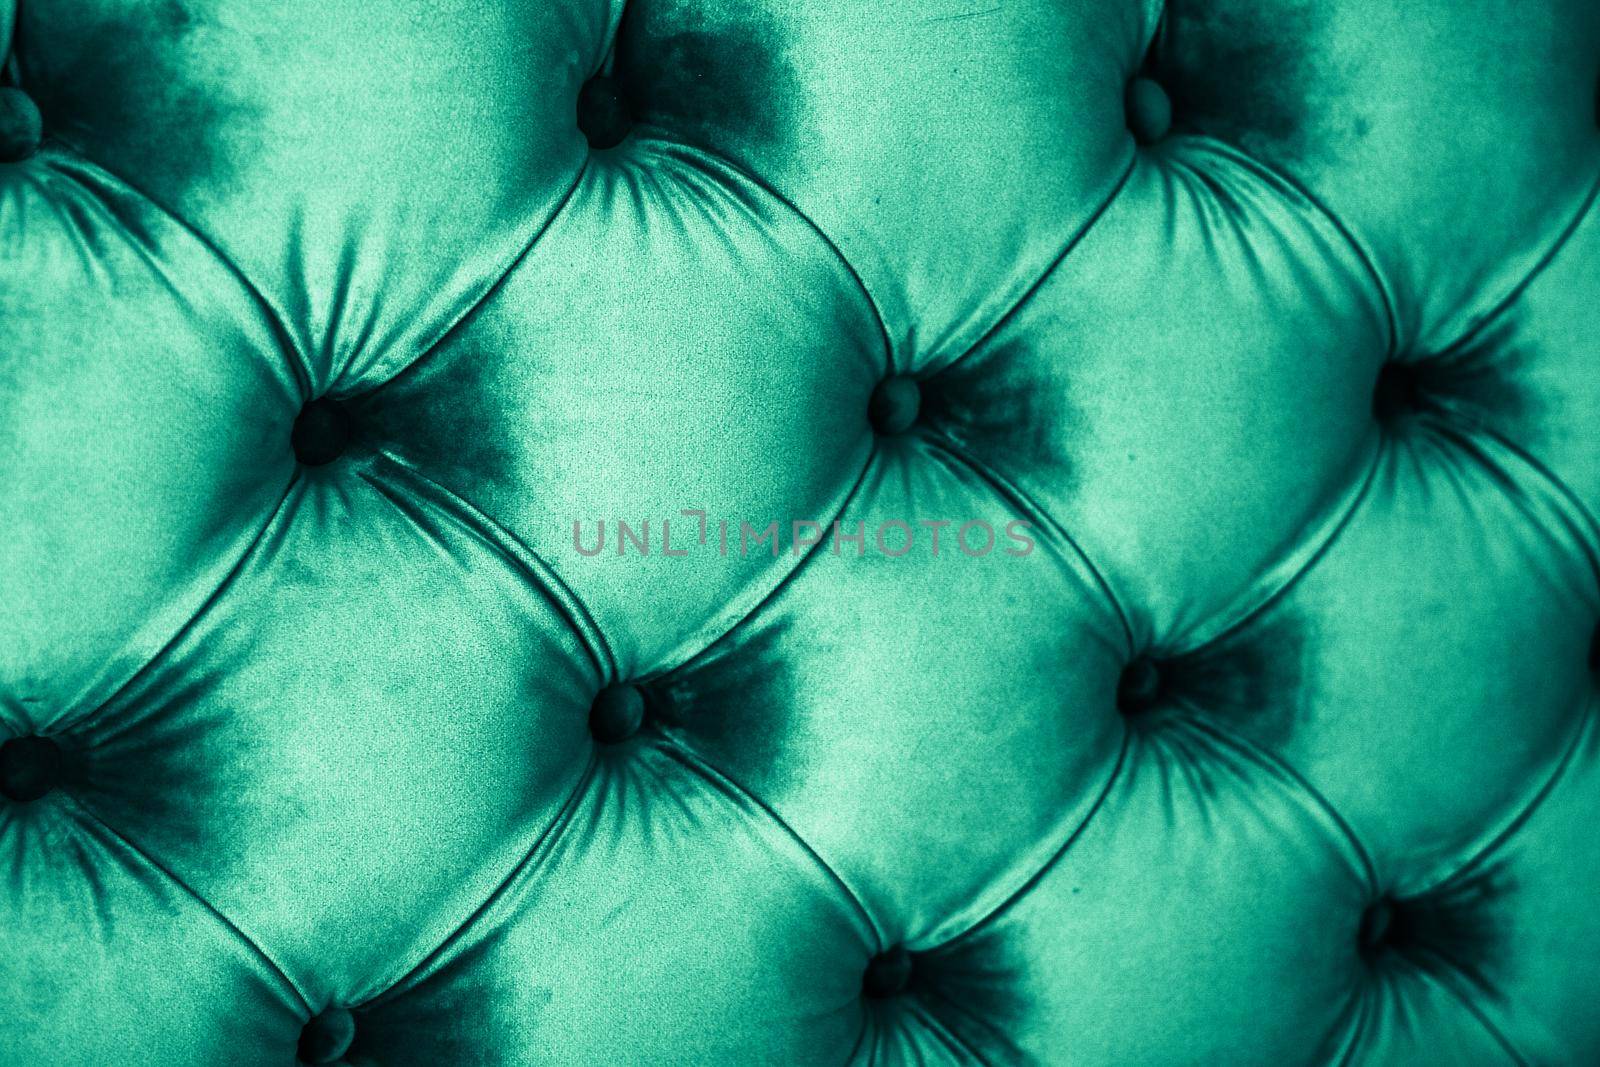 Furniture design, classic interior and royal vintage material concept - Emerald luxury velour quilted sofa upholstery with buttons, elegant green home decor texture and background